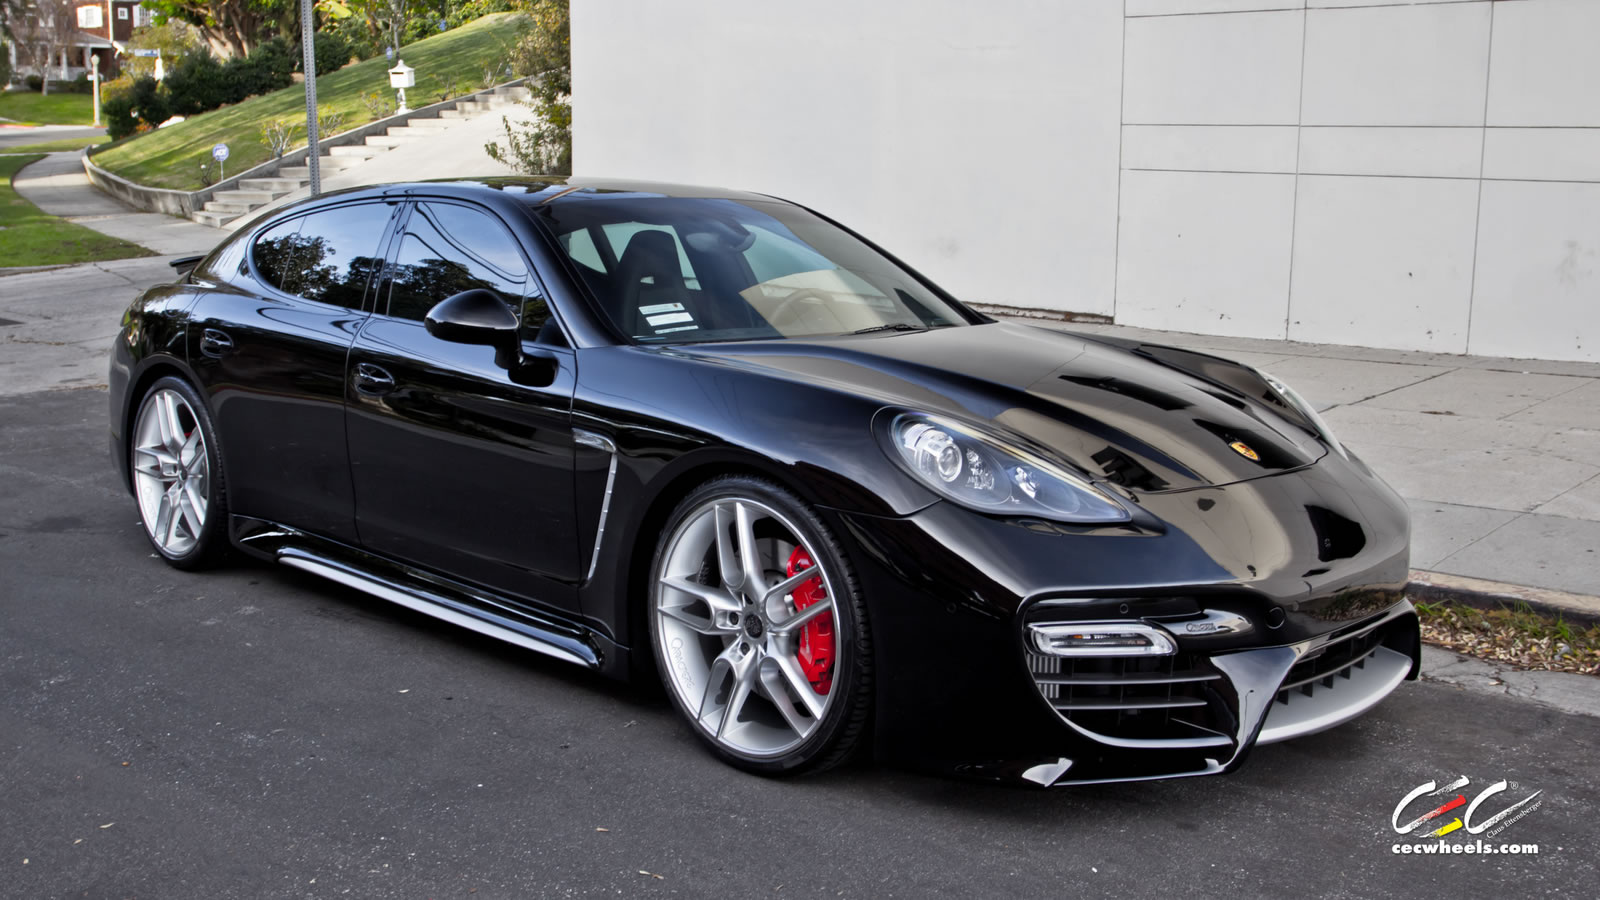 Caractere Exclusive Panamera Turbo S Gets CEC 22" Wheels - photo gallery